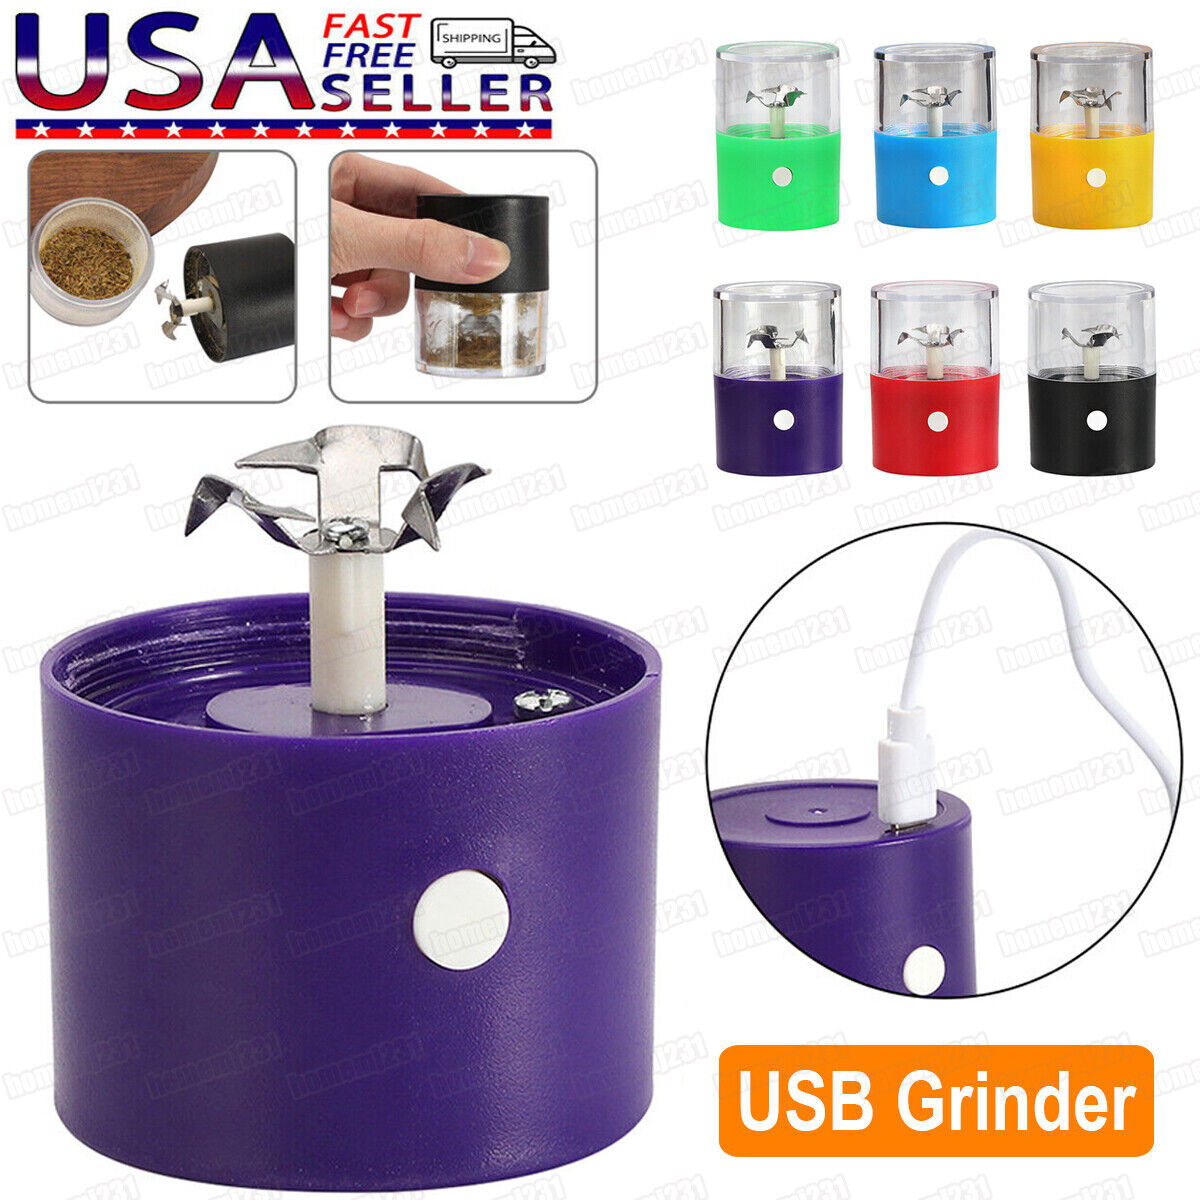 NEW Portable Electric Auto He*rb Machine Grinder Crusher USB Rechargeable